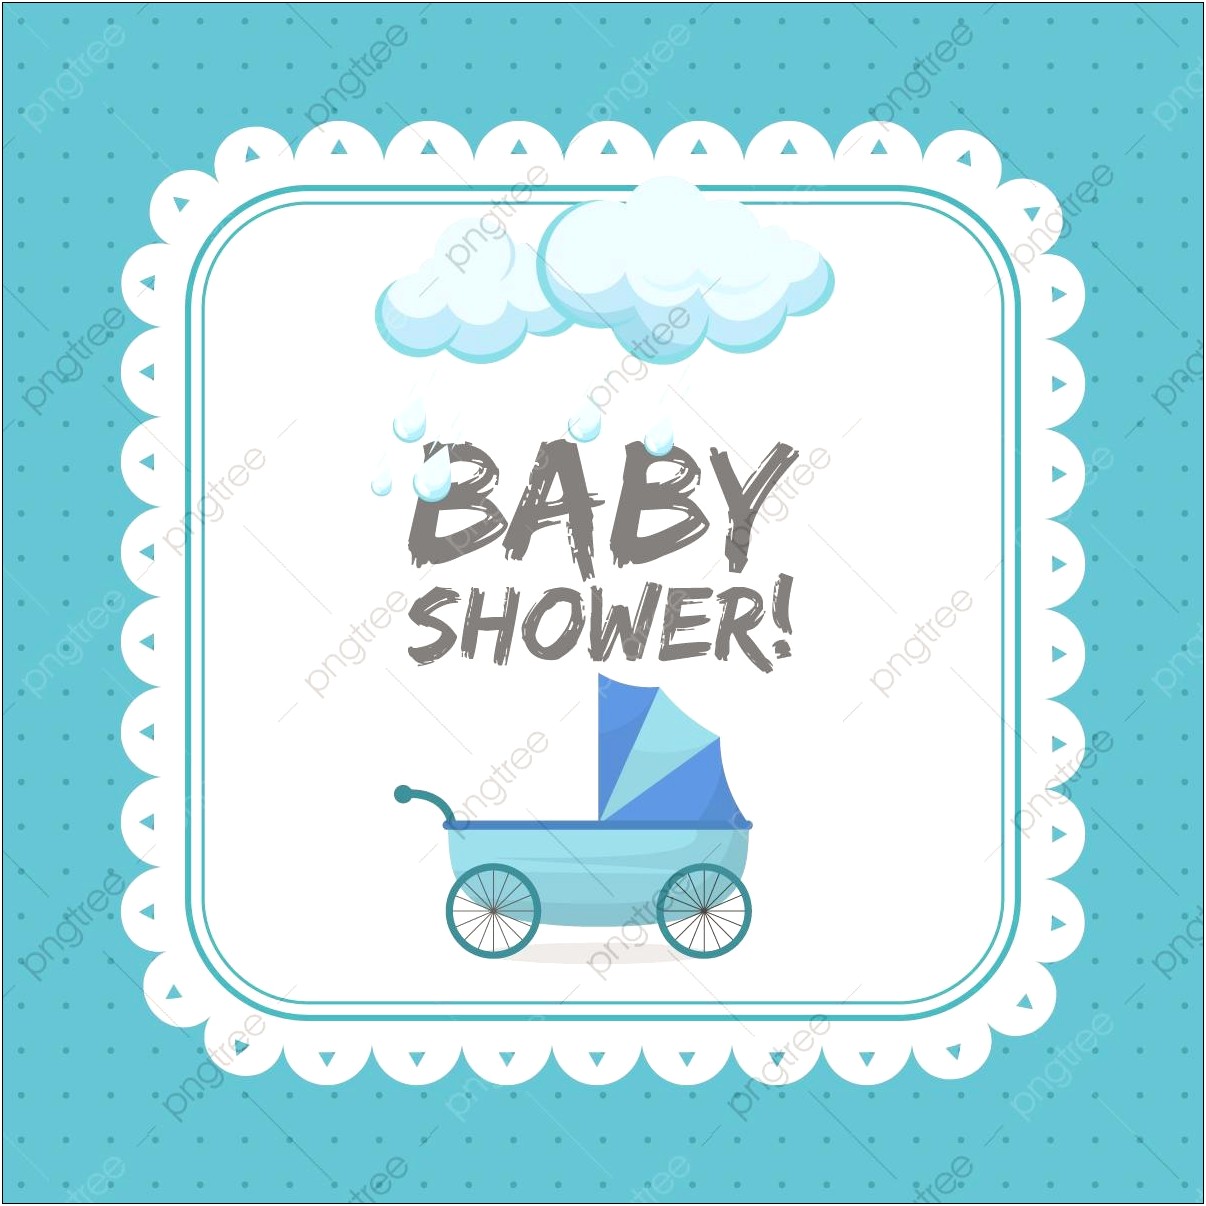 Baby Shower Invitation Dimensions Photoshop Template Free